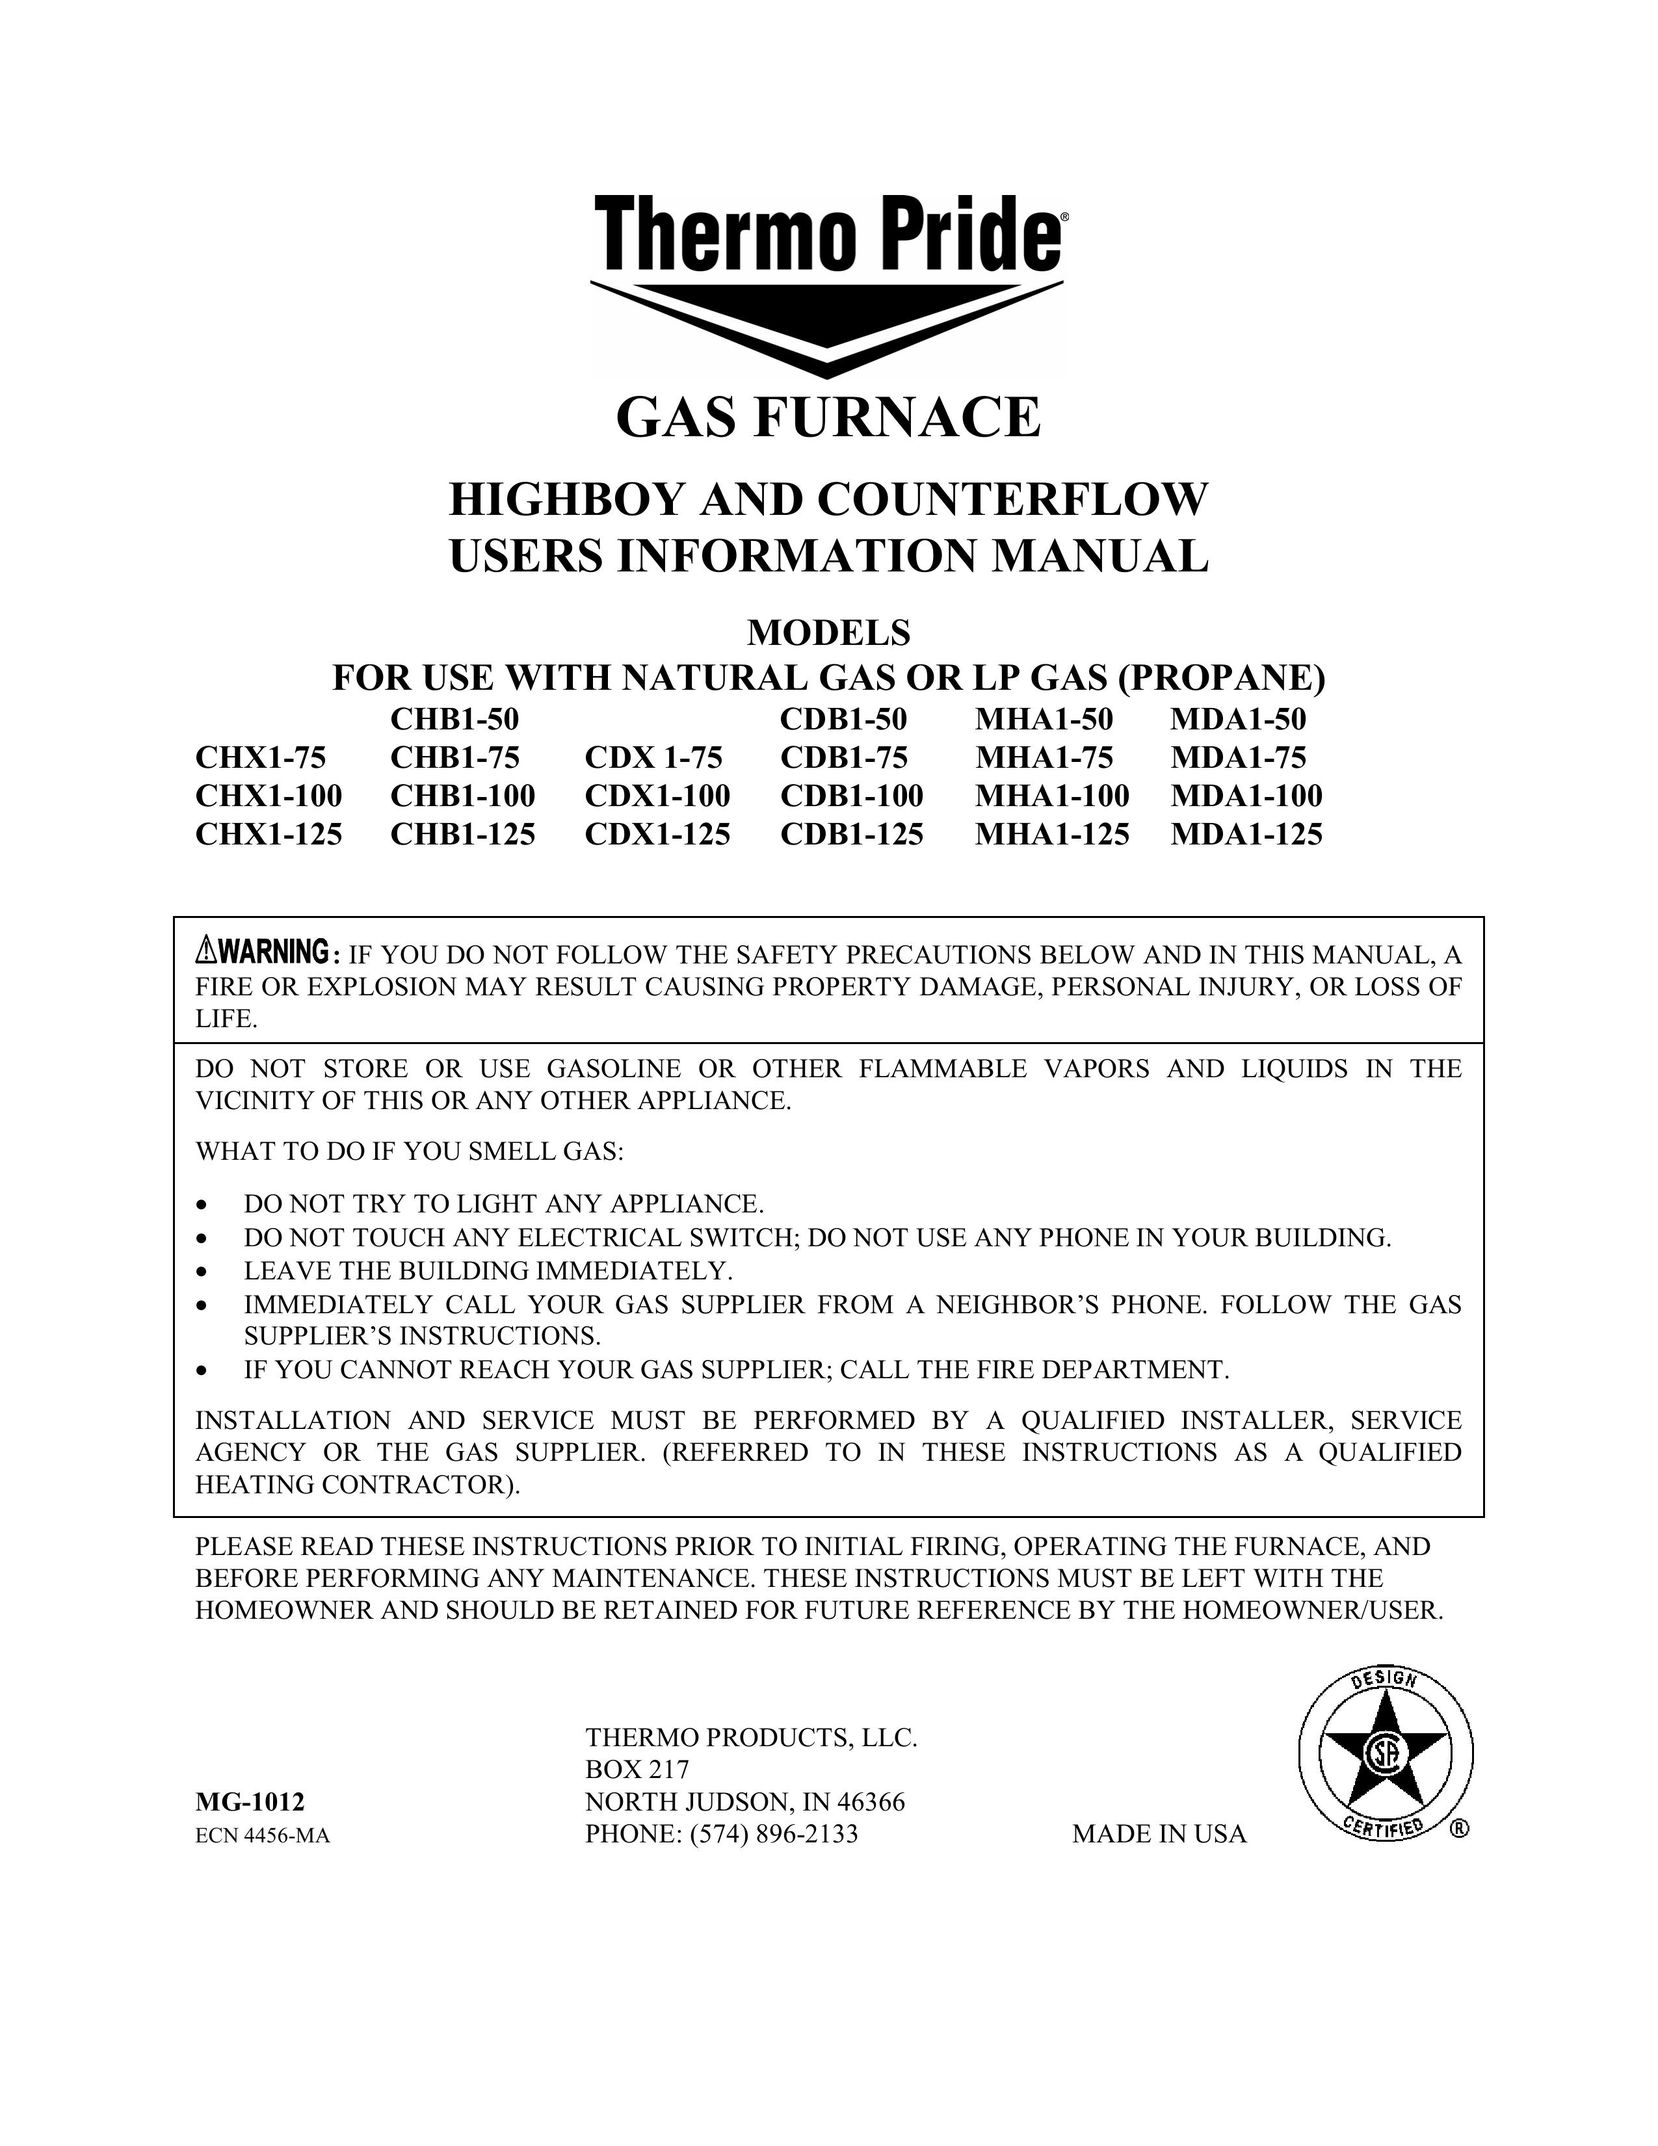 Thermo Products CDX1-100 Furnace User Manual